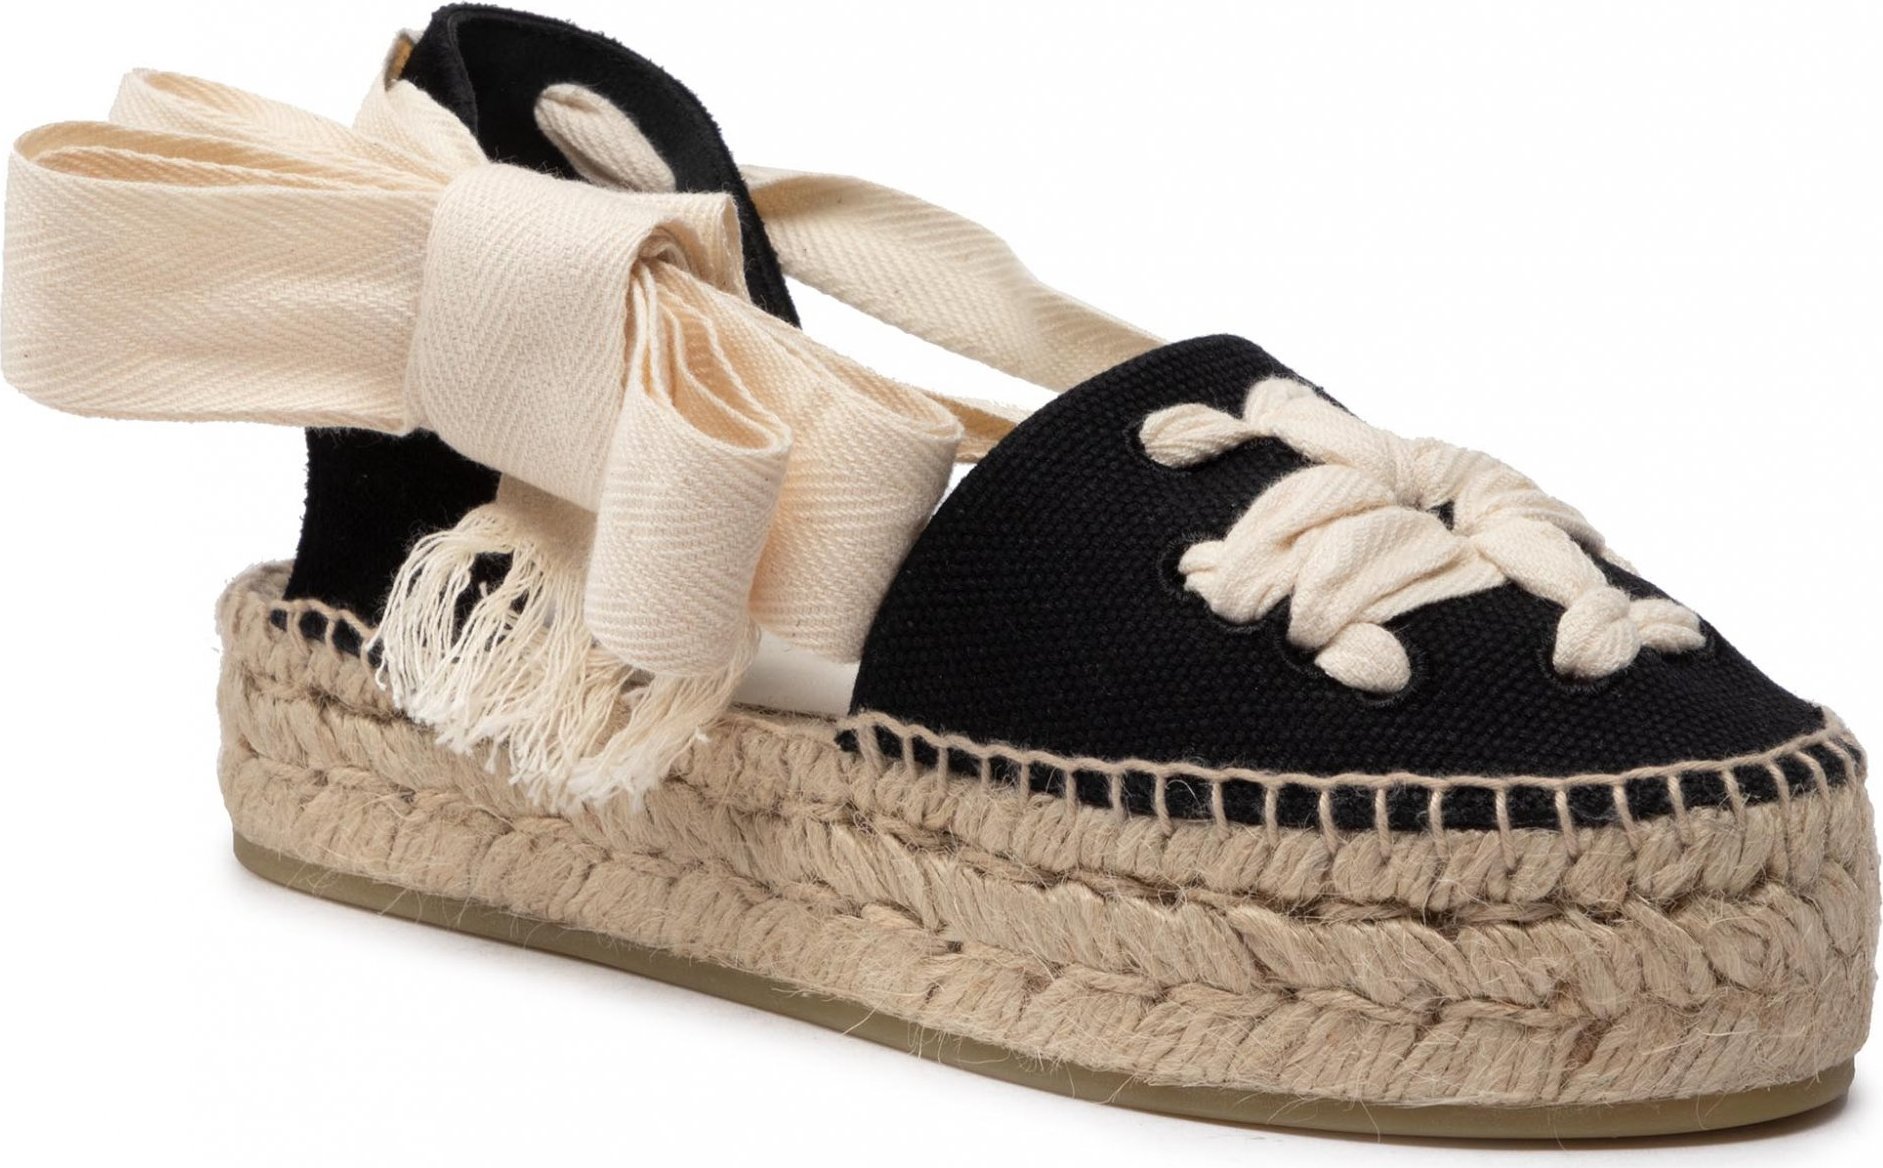 Tory Burch Woven Double Espadrille 140308